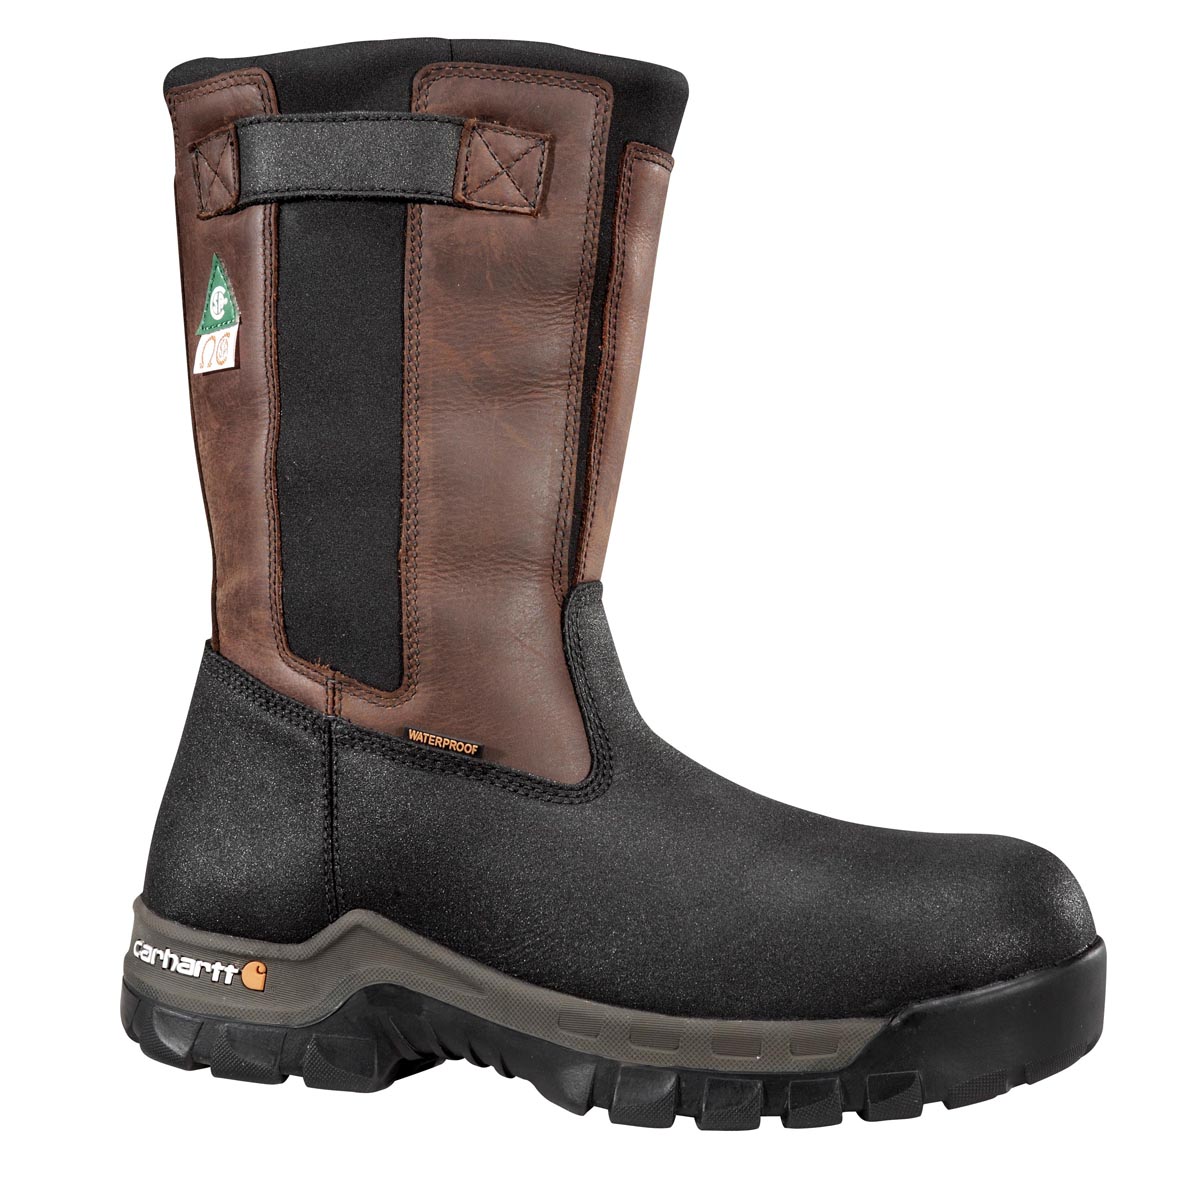 Carhartt Men's 10 Inch Rugged Flex Waterproof Insulated CSA Pull On Composite Toe